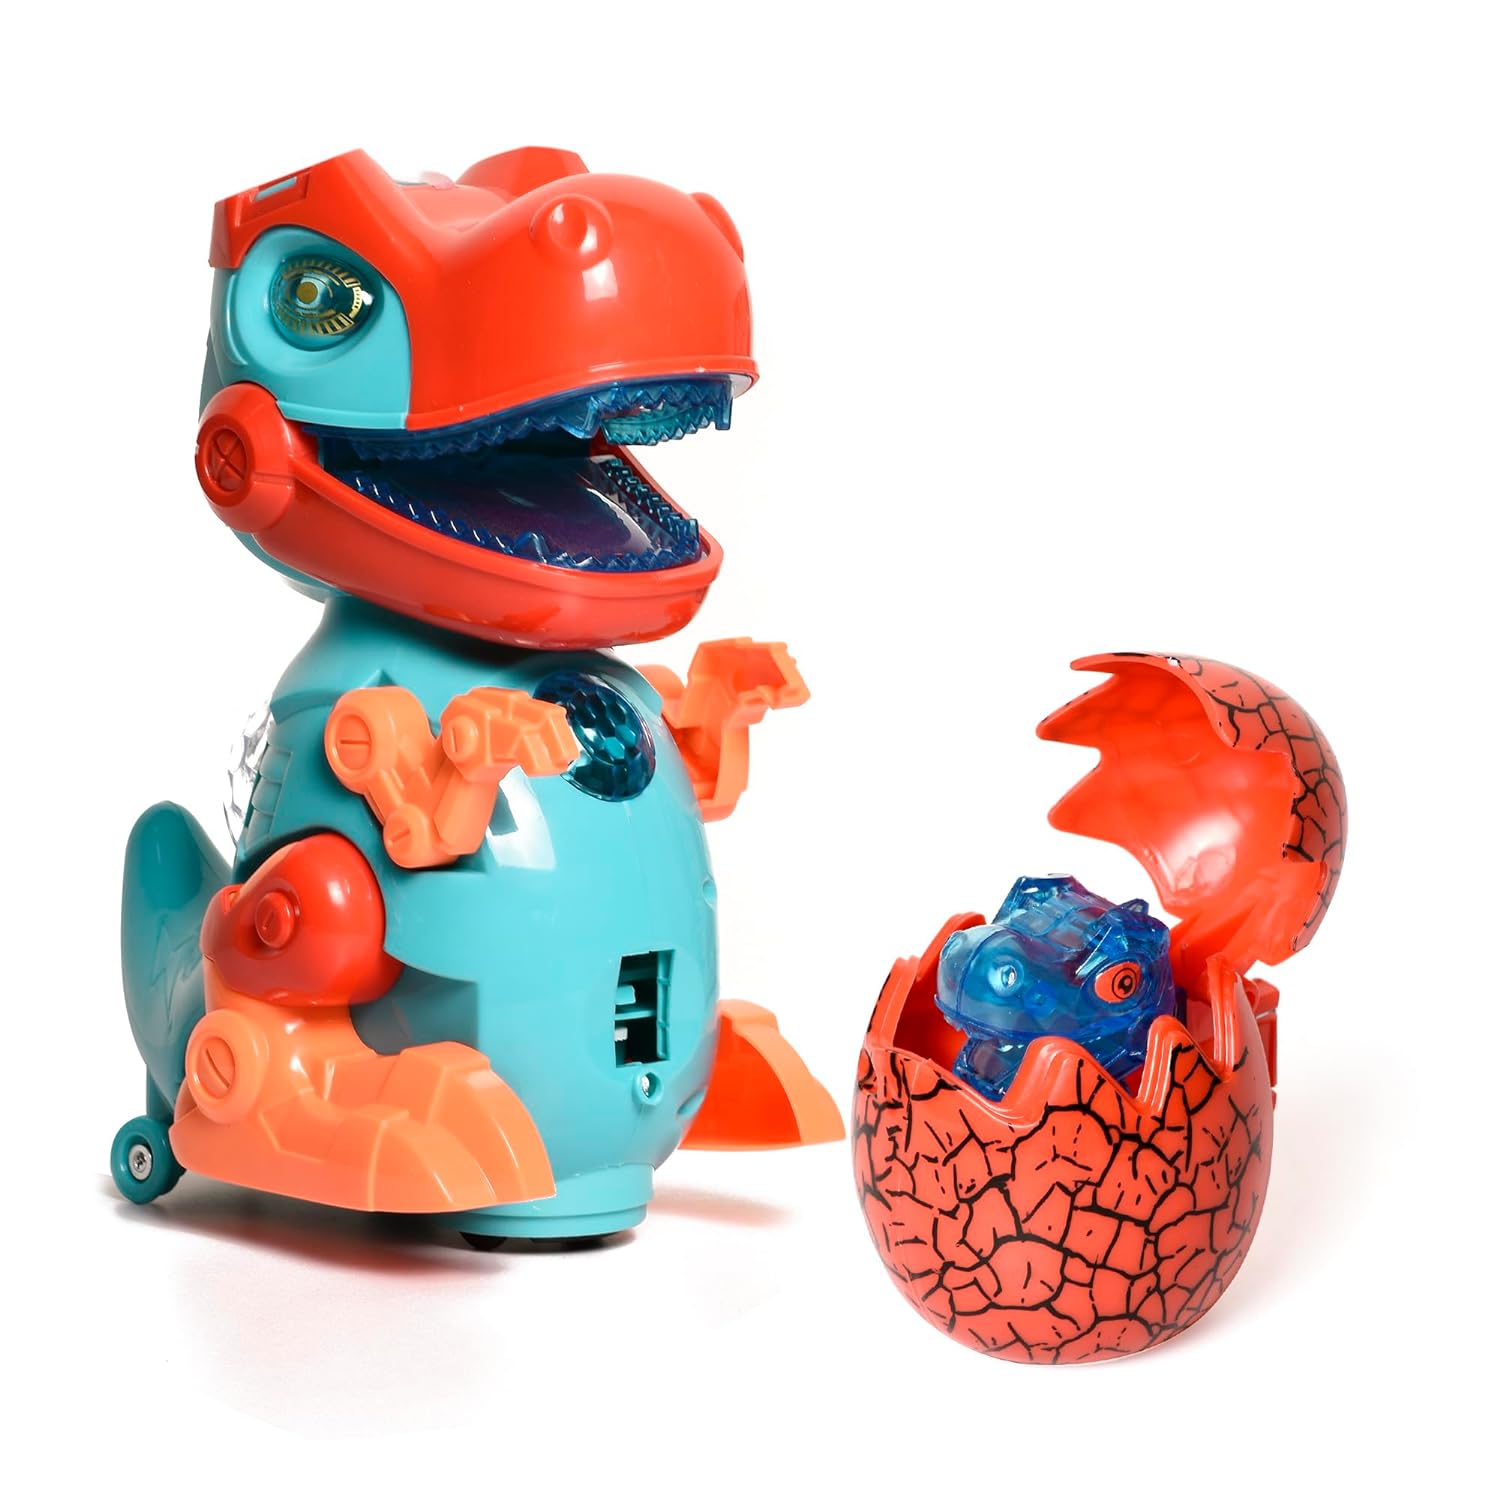 Braintastic Dinosaur Musical Toy with Flashing Lights and Sounds Learning Early Development Toys for Kids Age 3+ Years